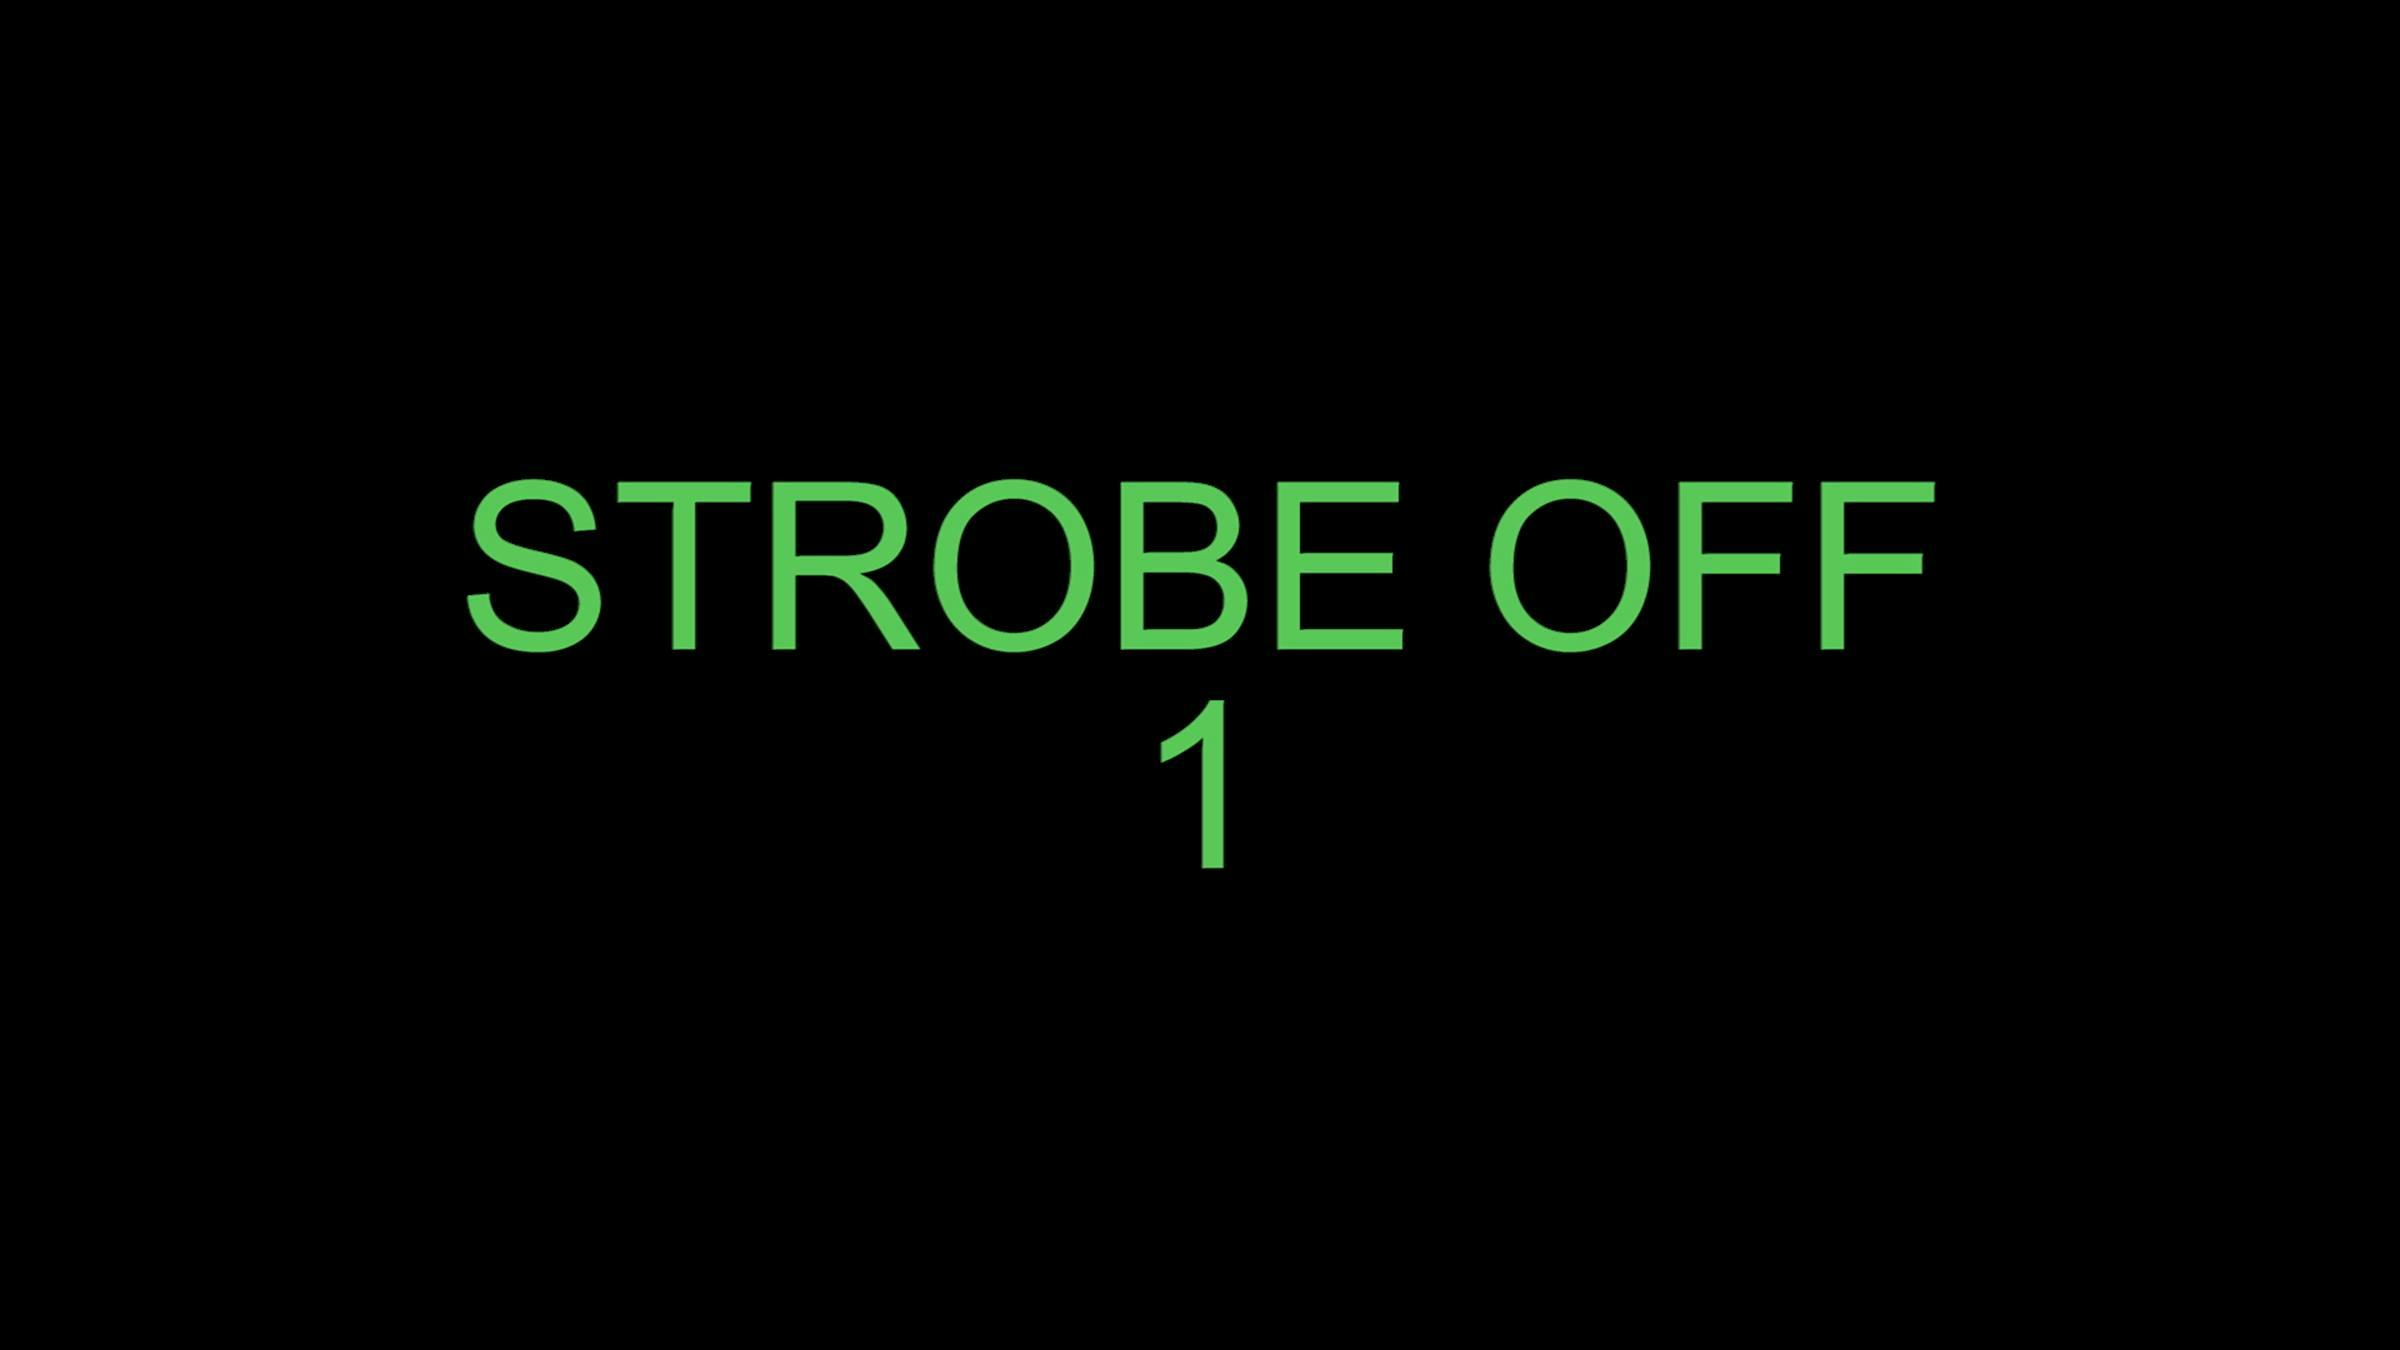 Black image with green texts in capitals which reads 'STROBE OFF 1'.